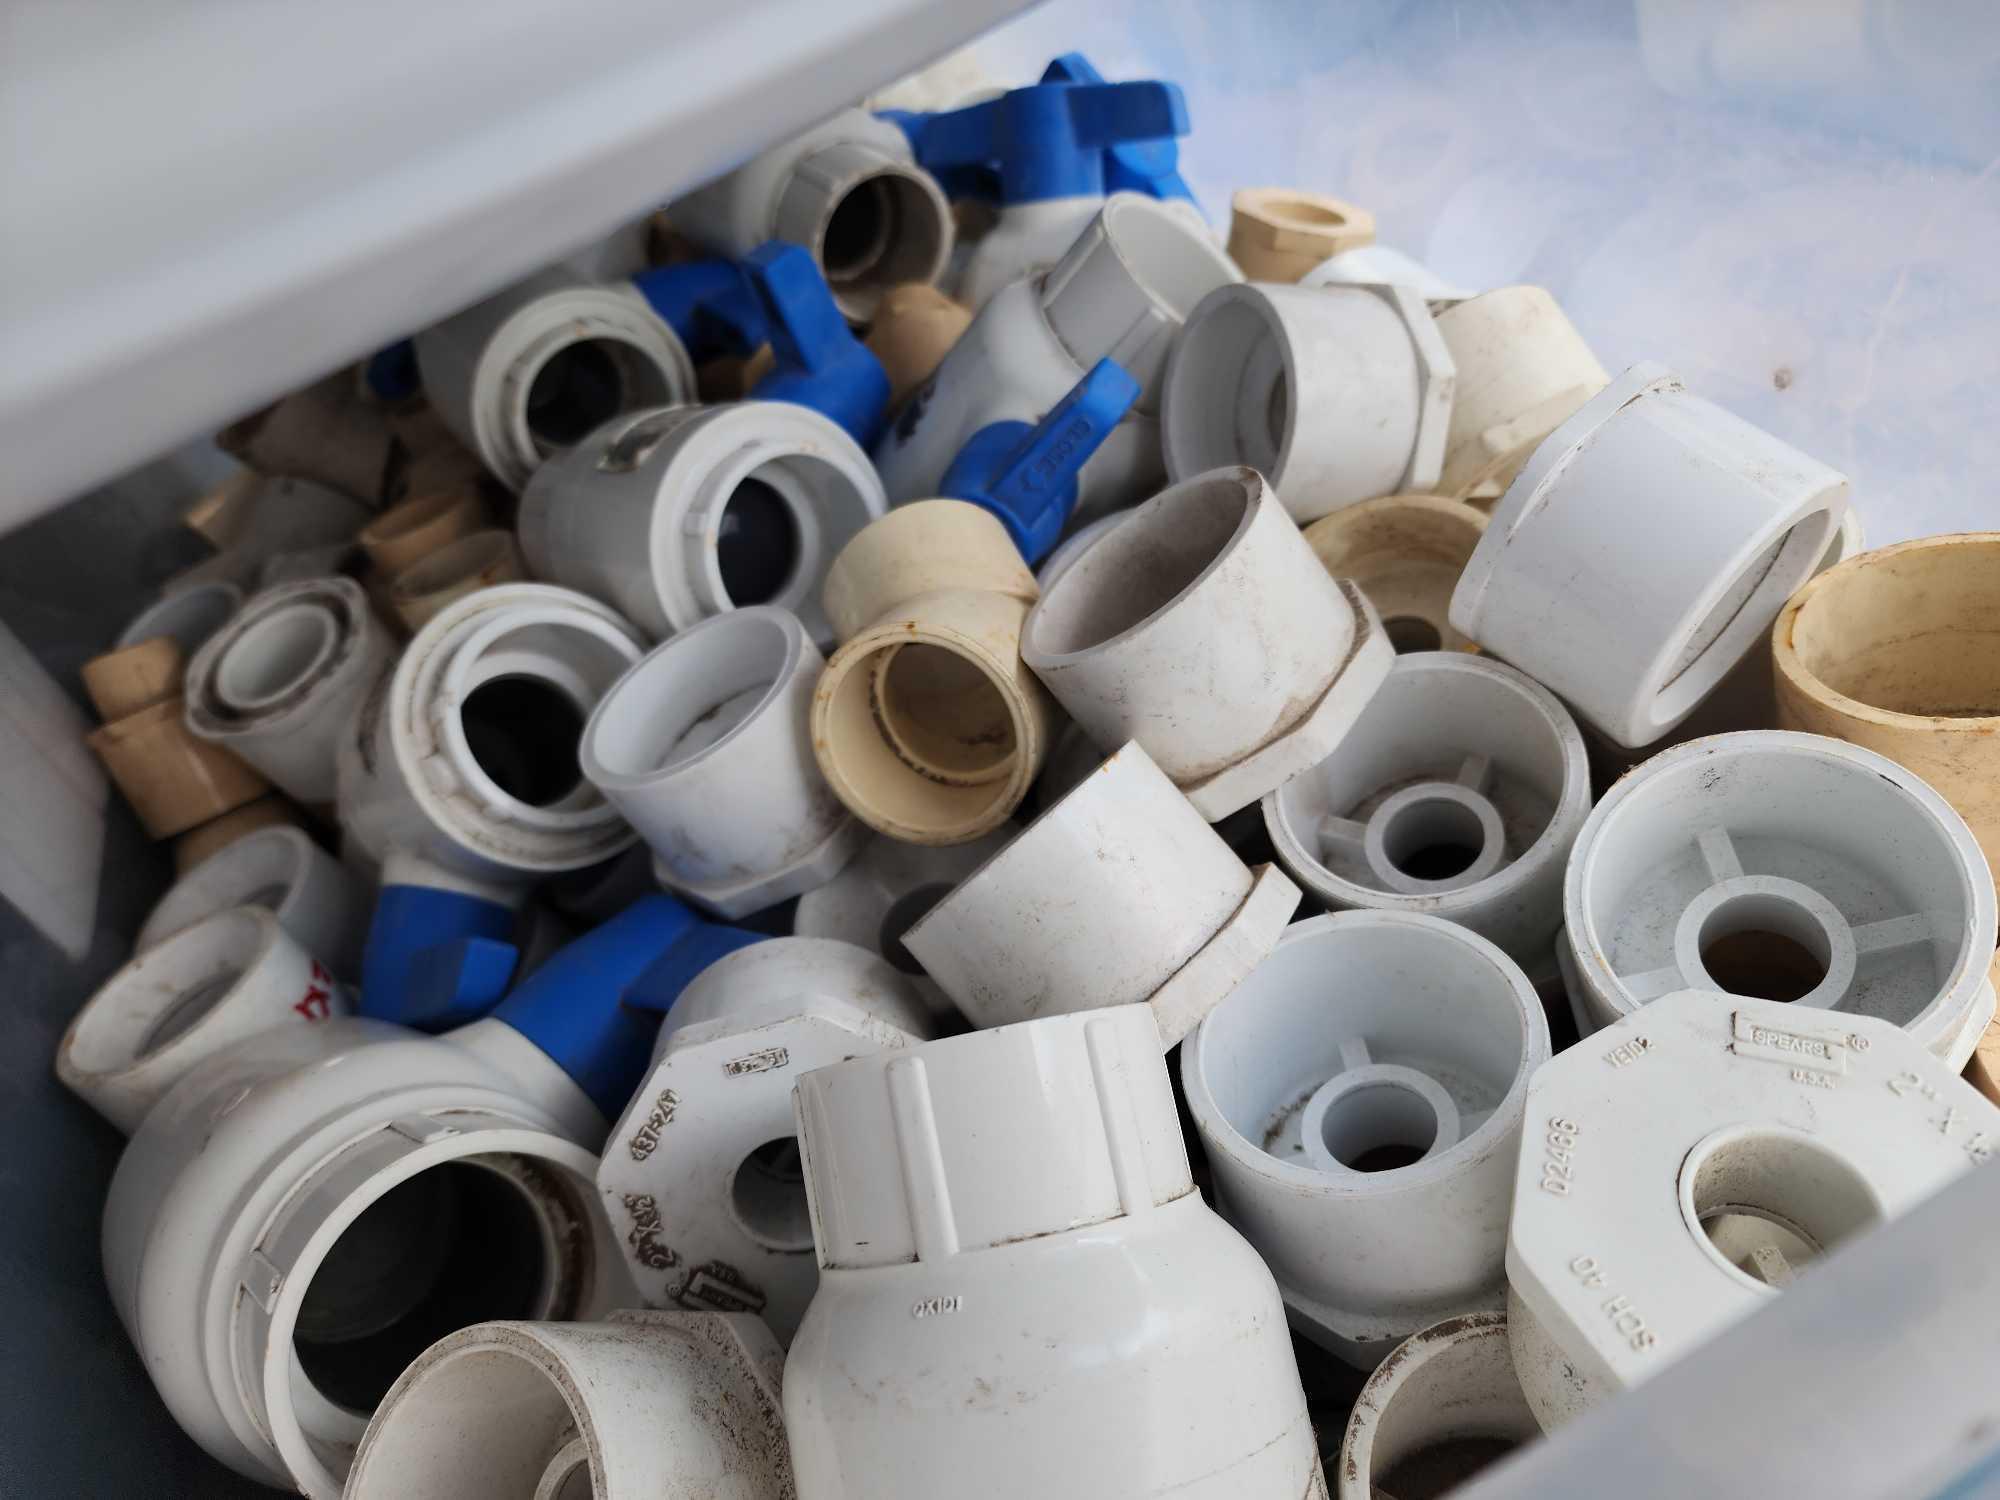 (5) Bins of Assorted PVC Pipe Fittings